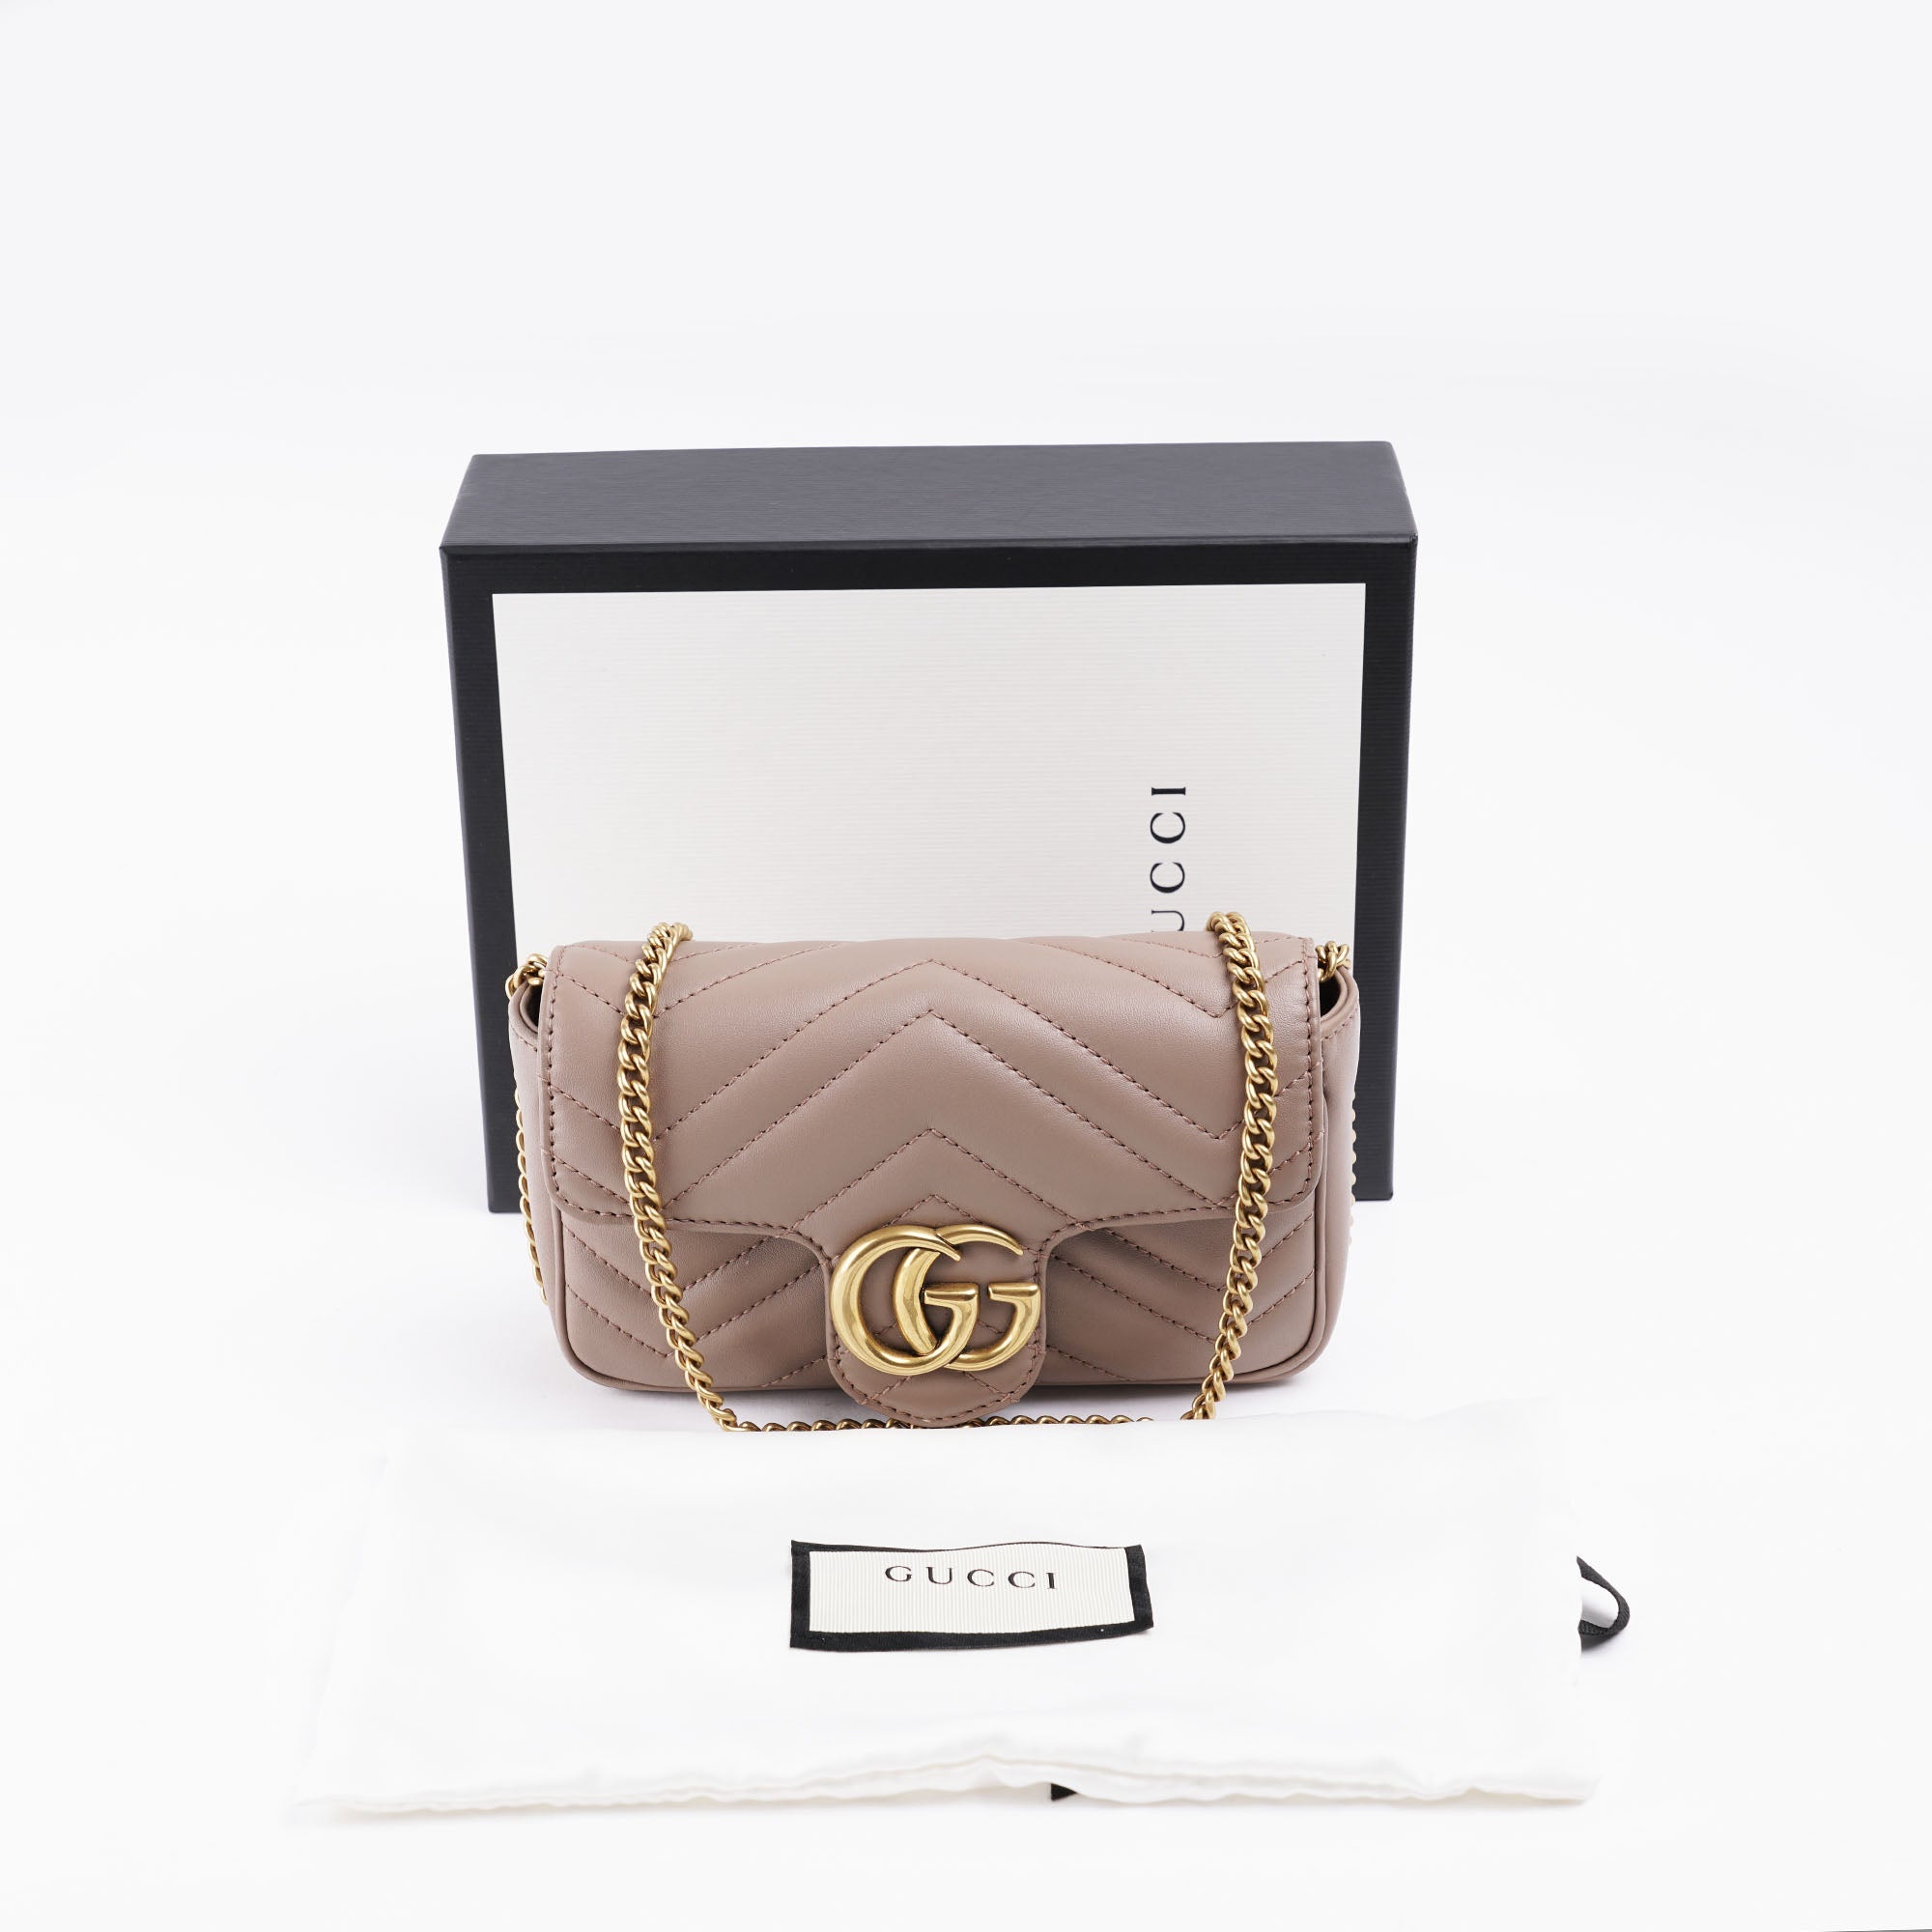 GG Marmont Super Mini Bag - GUCCI - Affordable Luxury image